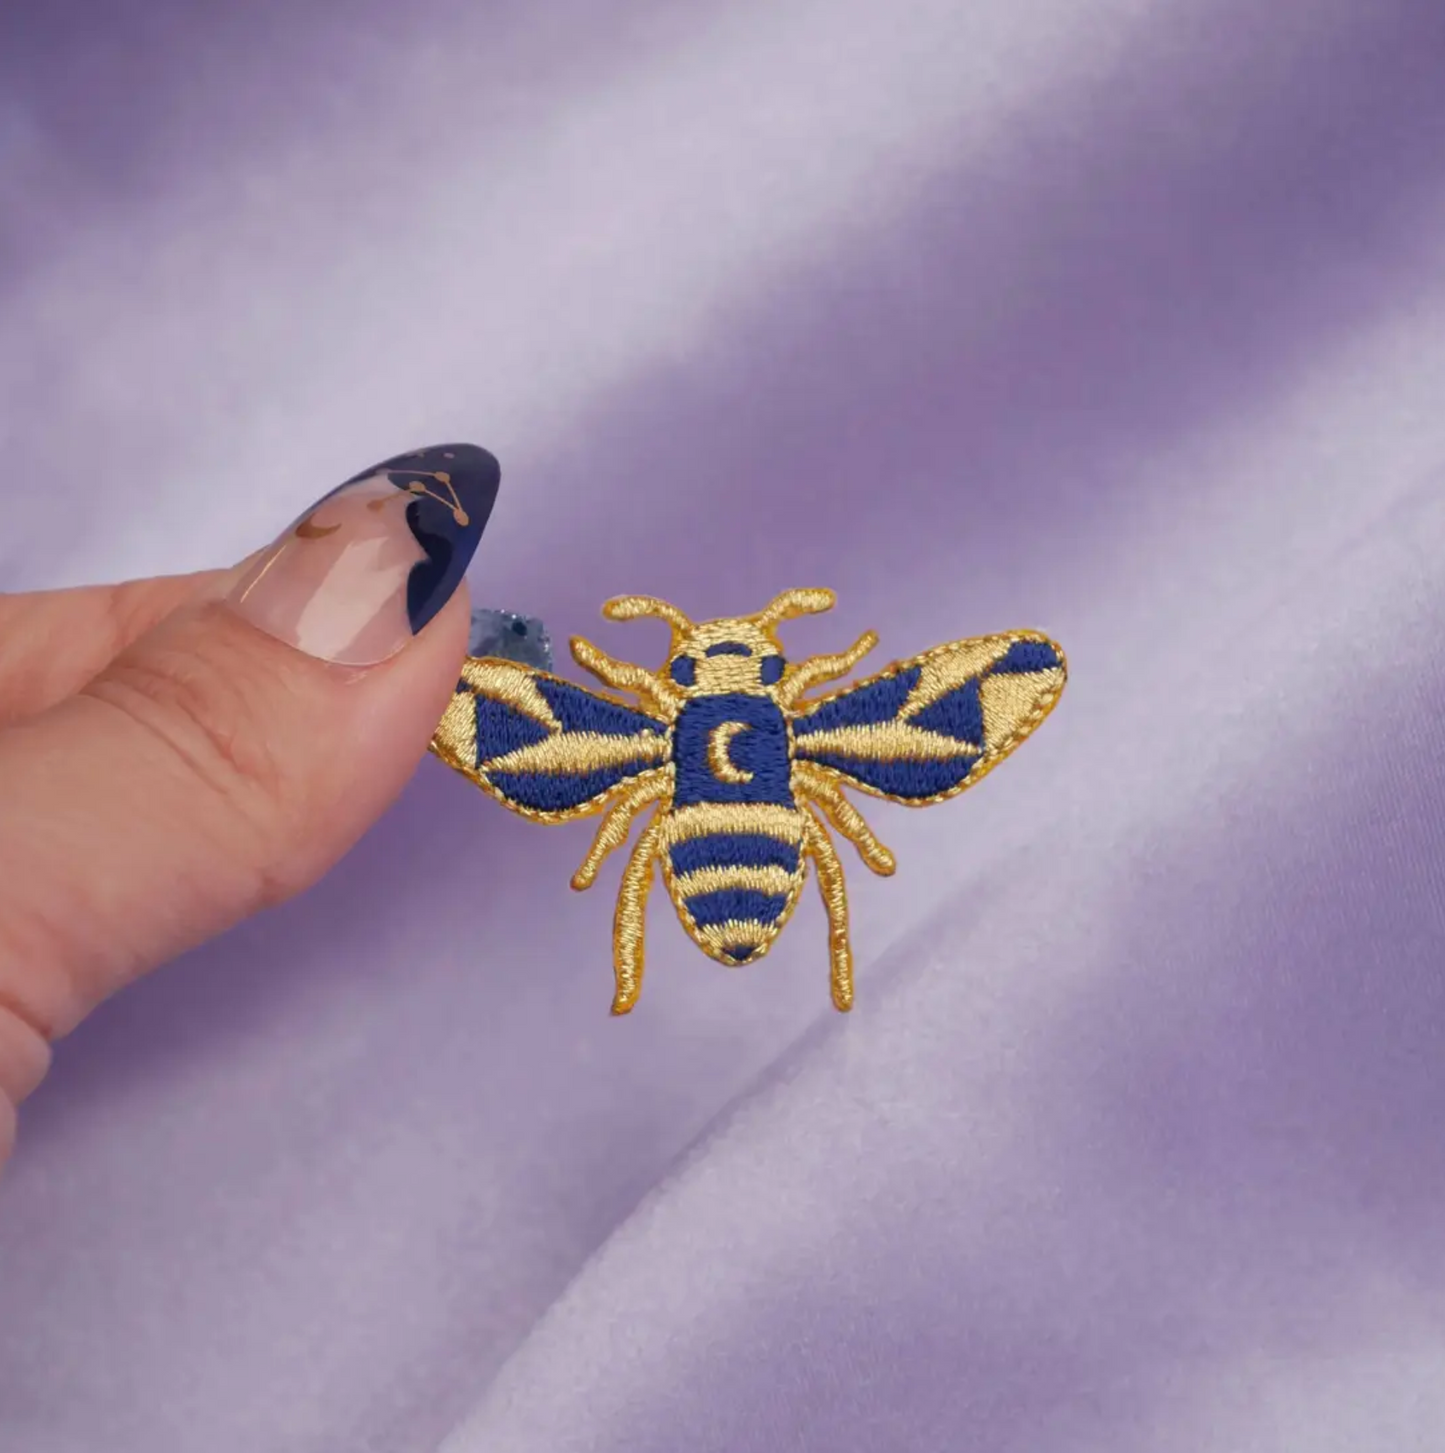 Small Gold Bee Patch hecates light cottagecore metaphysical occult magic witchcraft tarot oracle cards witch tools